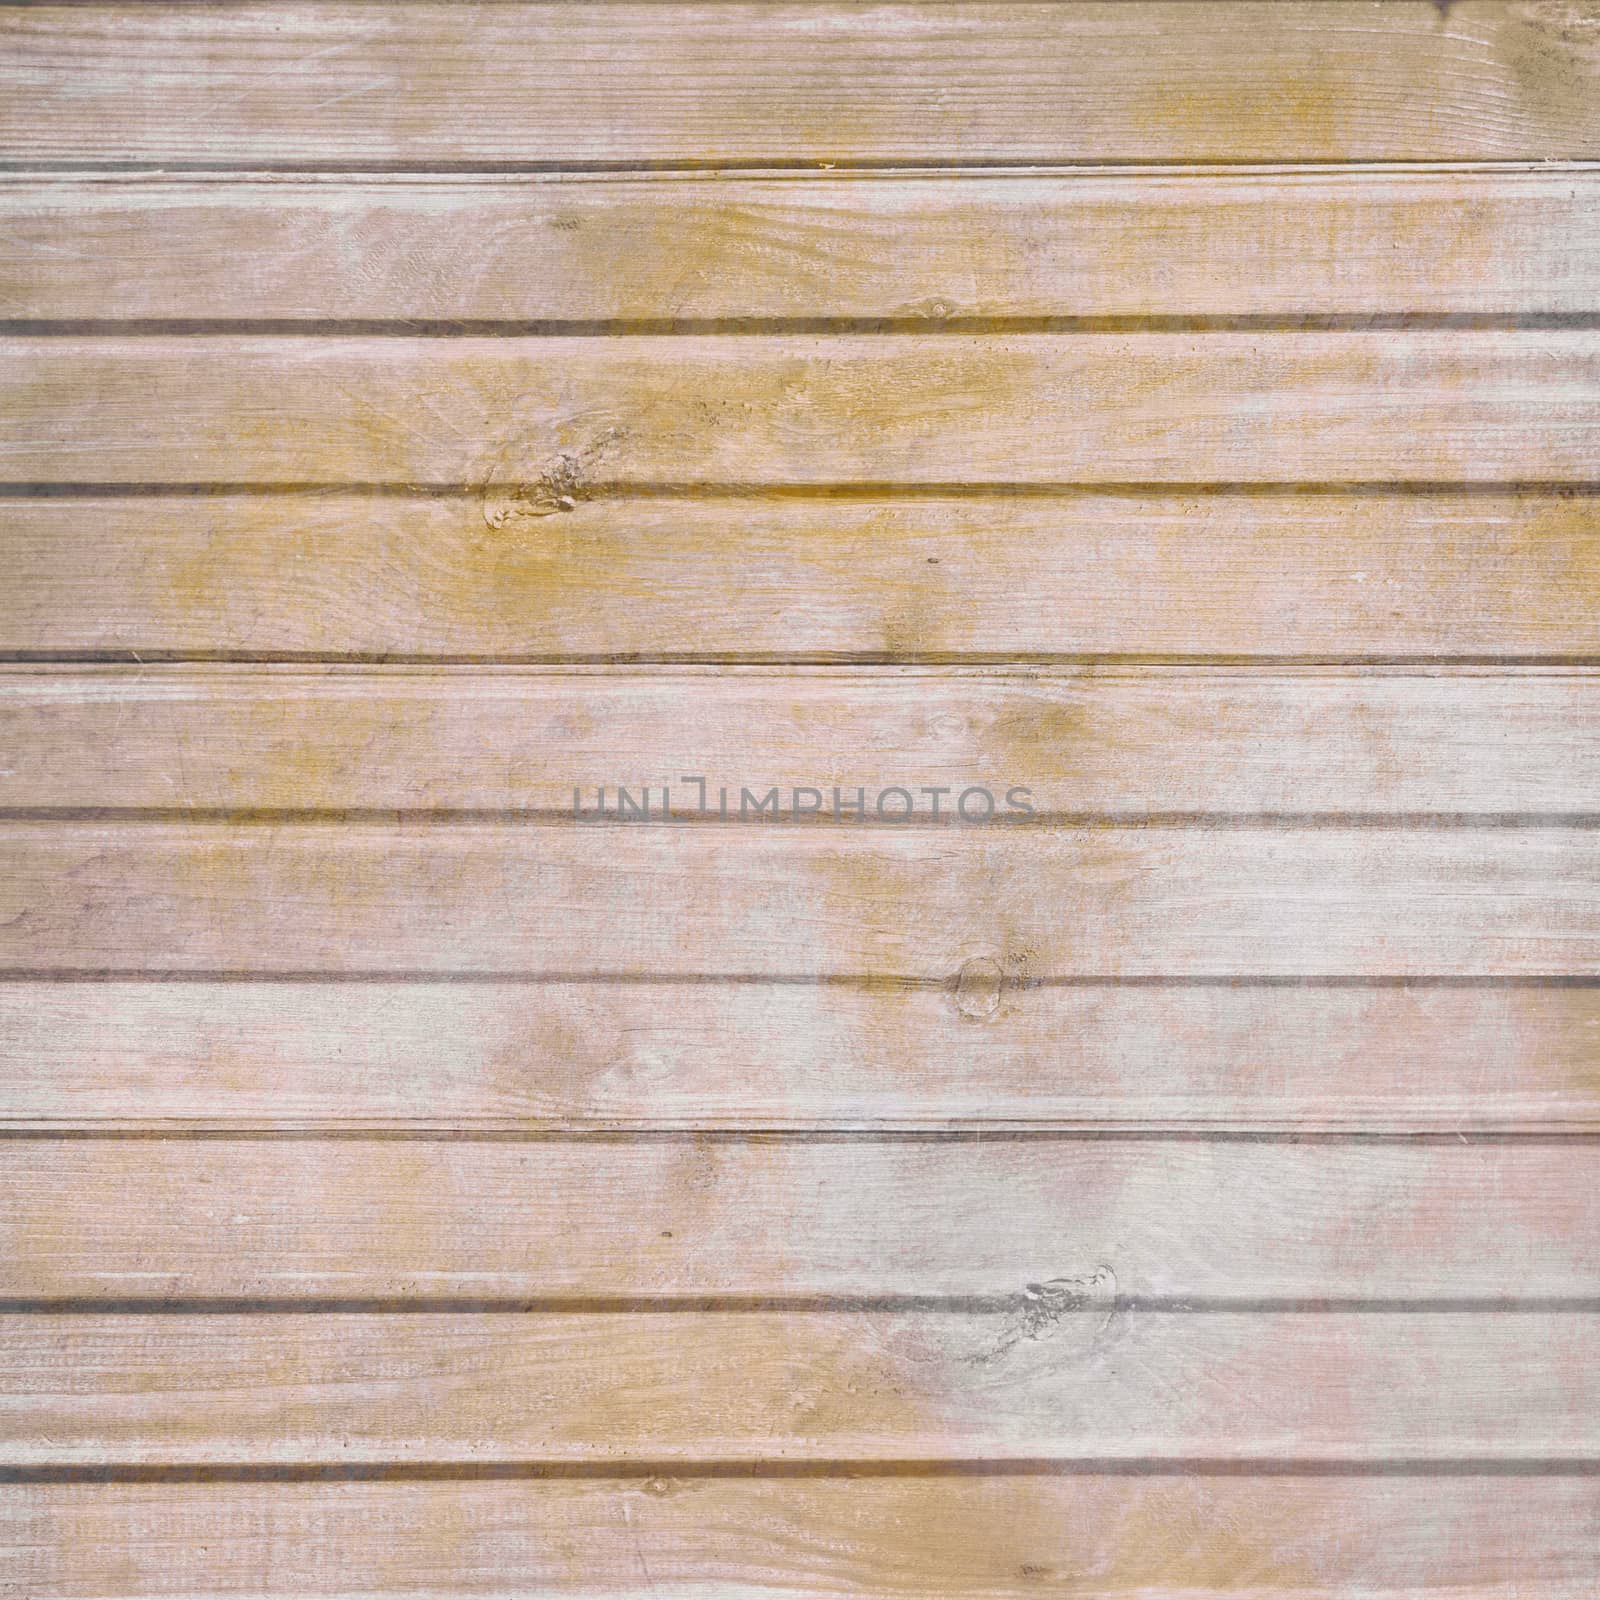 Vintage Fall Shabby Chic Background by kisika